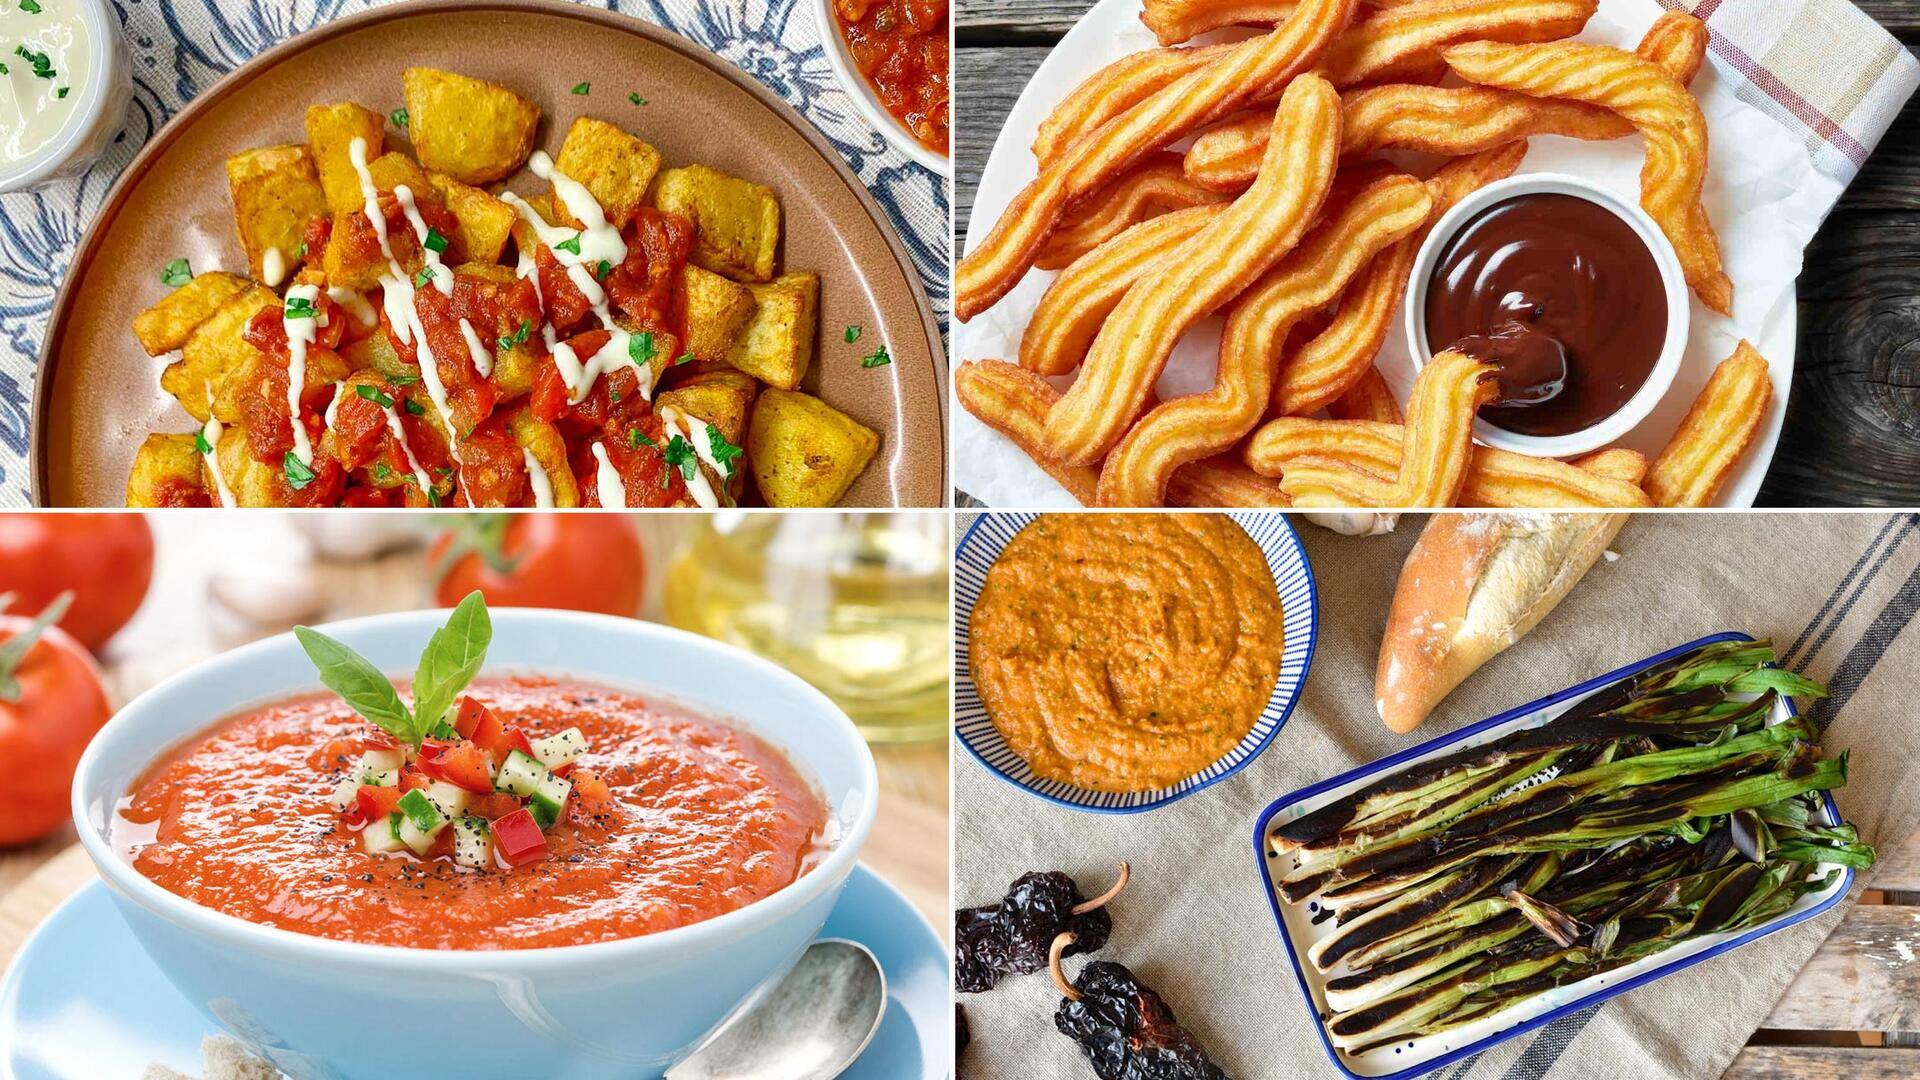 Exploring the vegetarian dishes from Spain